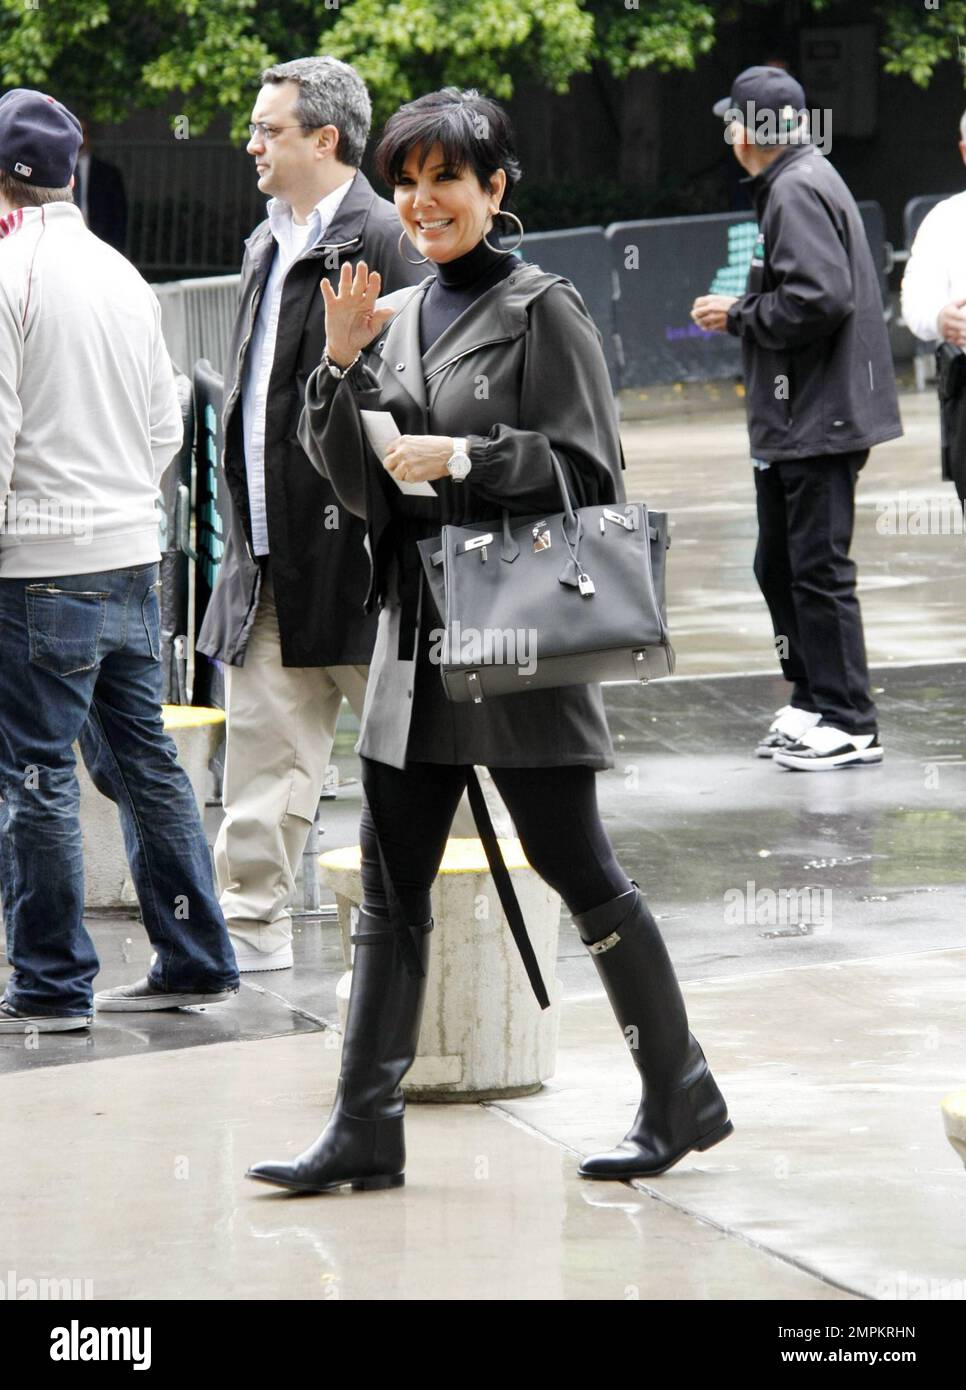 On a rainy afternoon reality TV star Kris Jenner dresses for the weather in  riding boots and trendy grey trench coat at the Staples Center to watch the  Boston Celtics vs Los